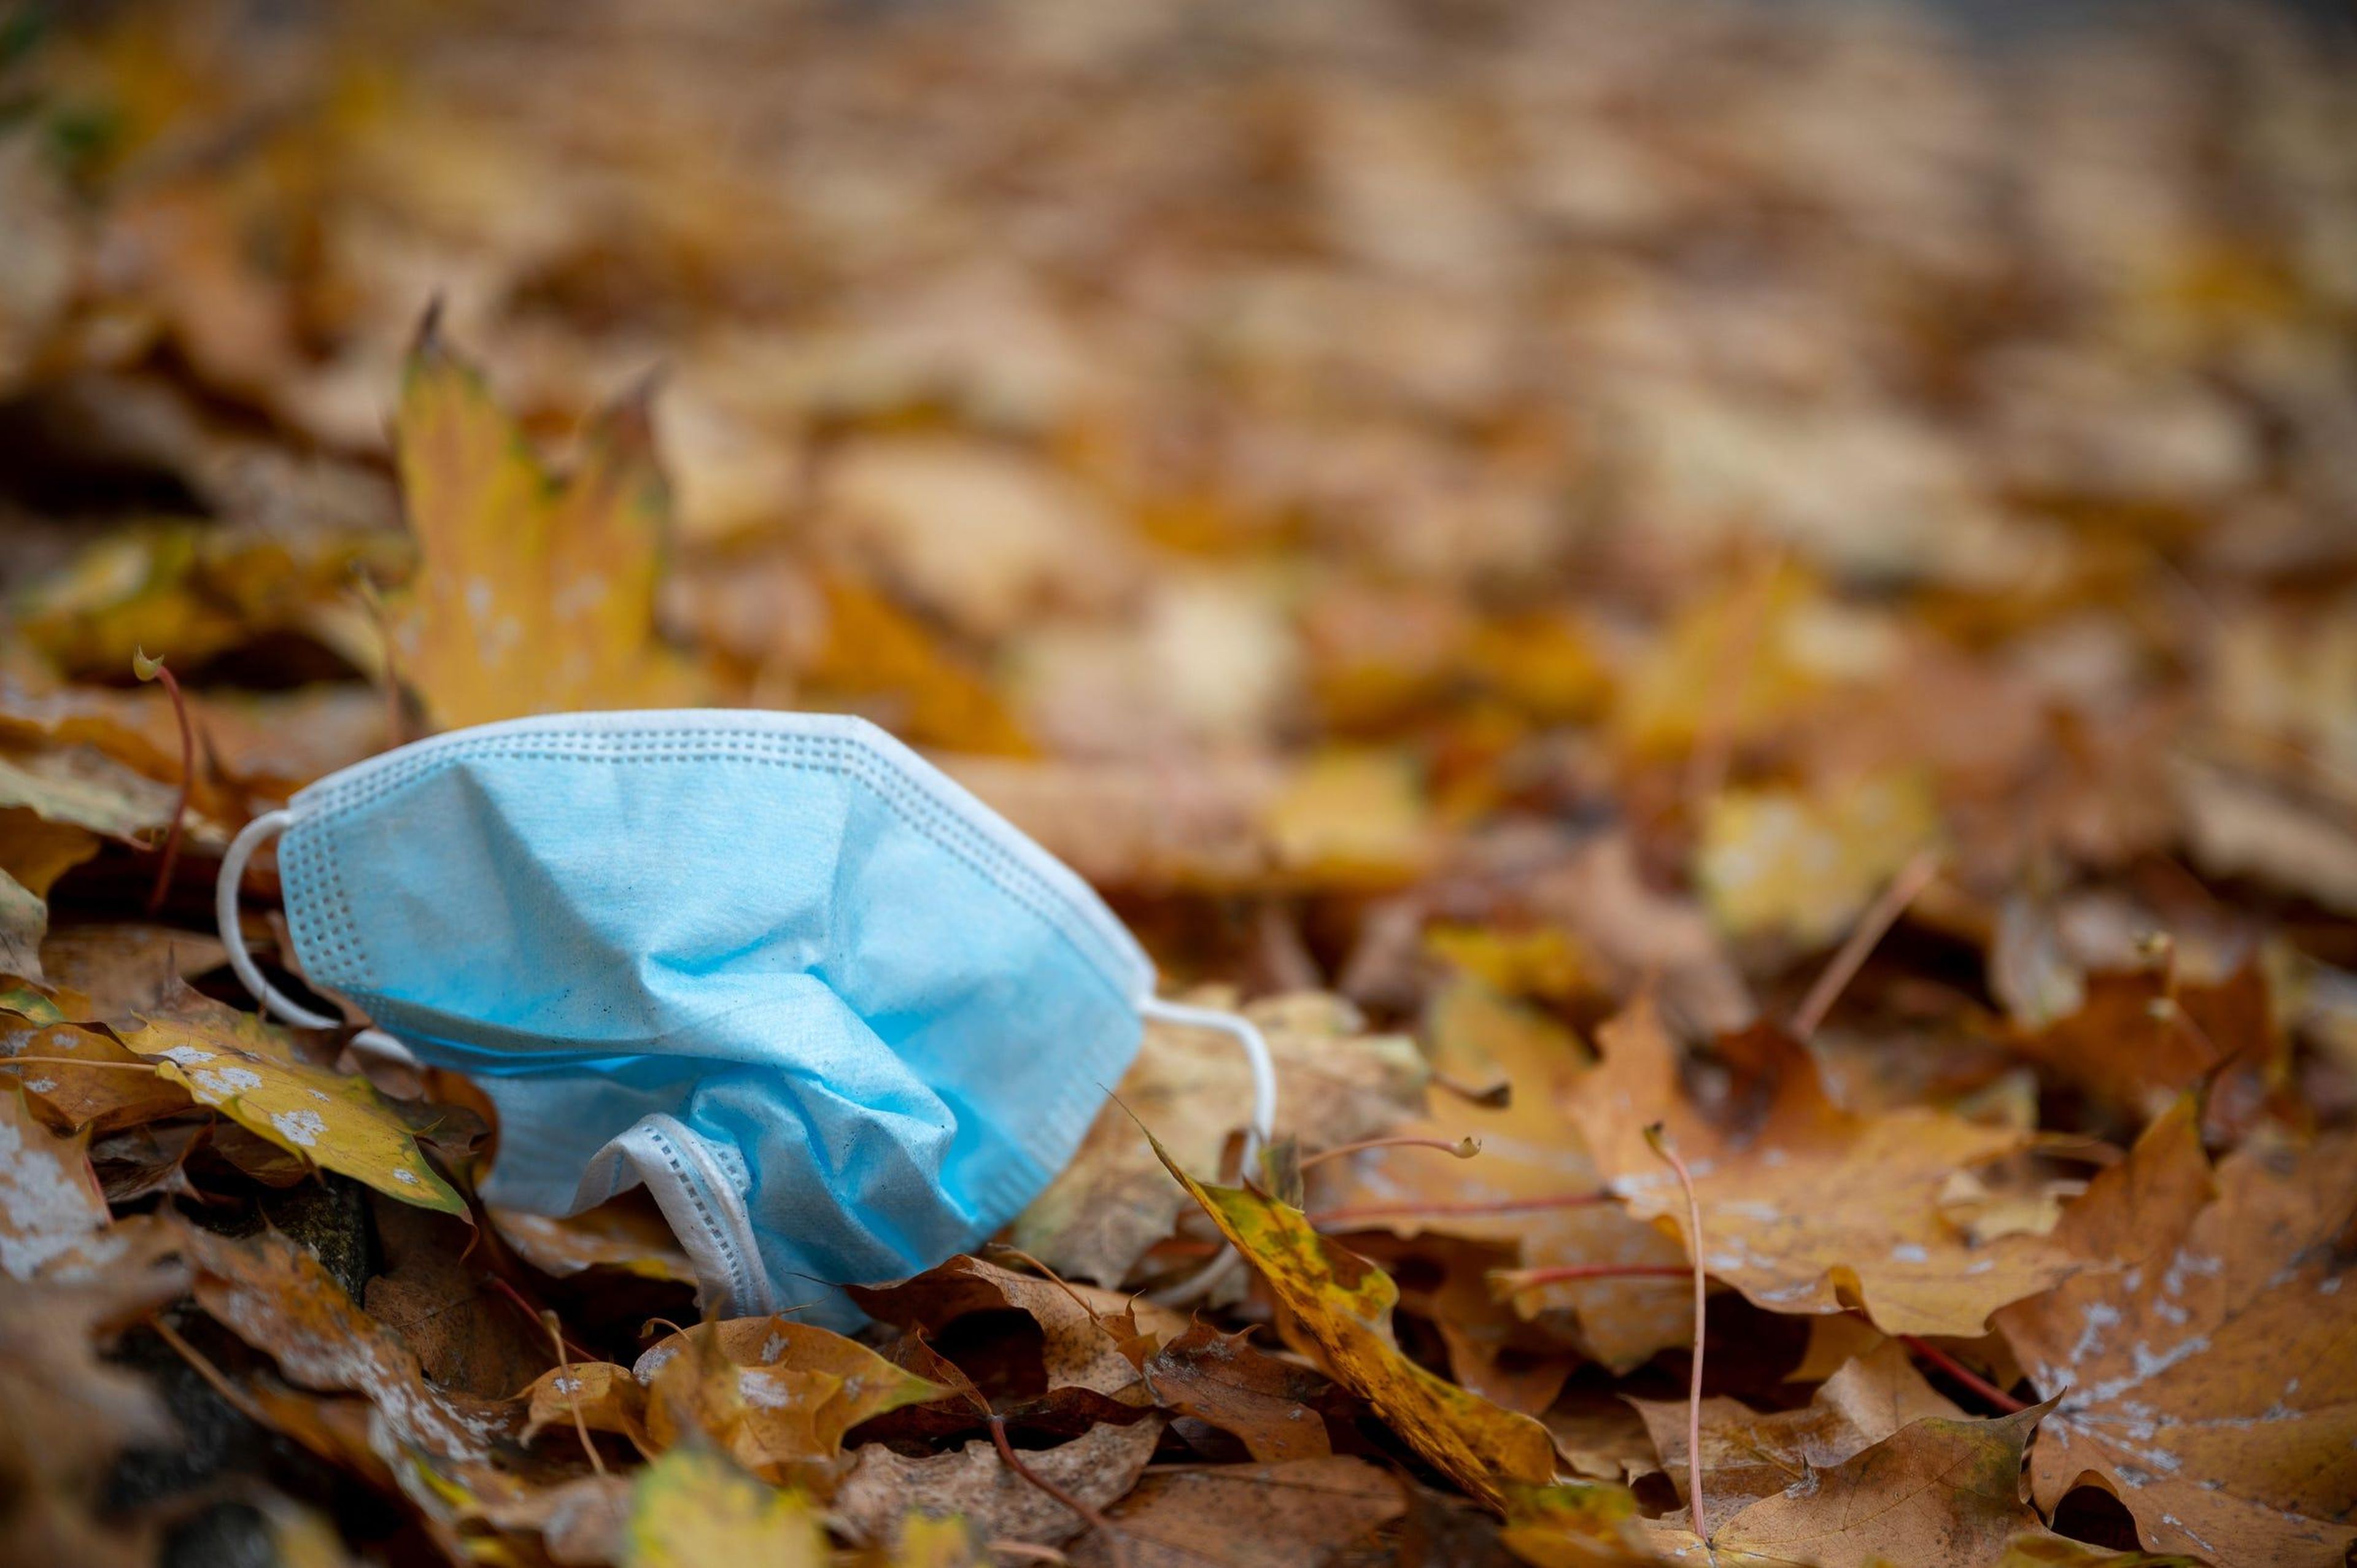 A face mask lies on the roadside in autumn foliage.